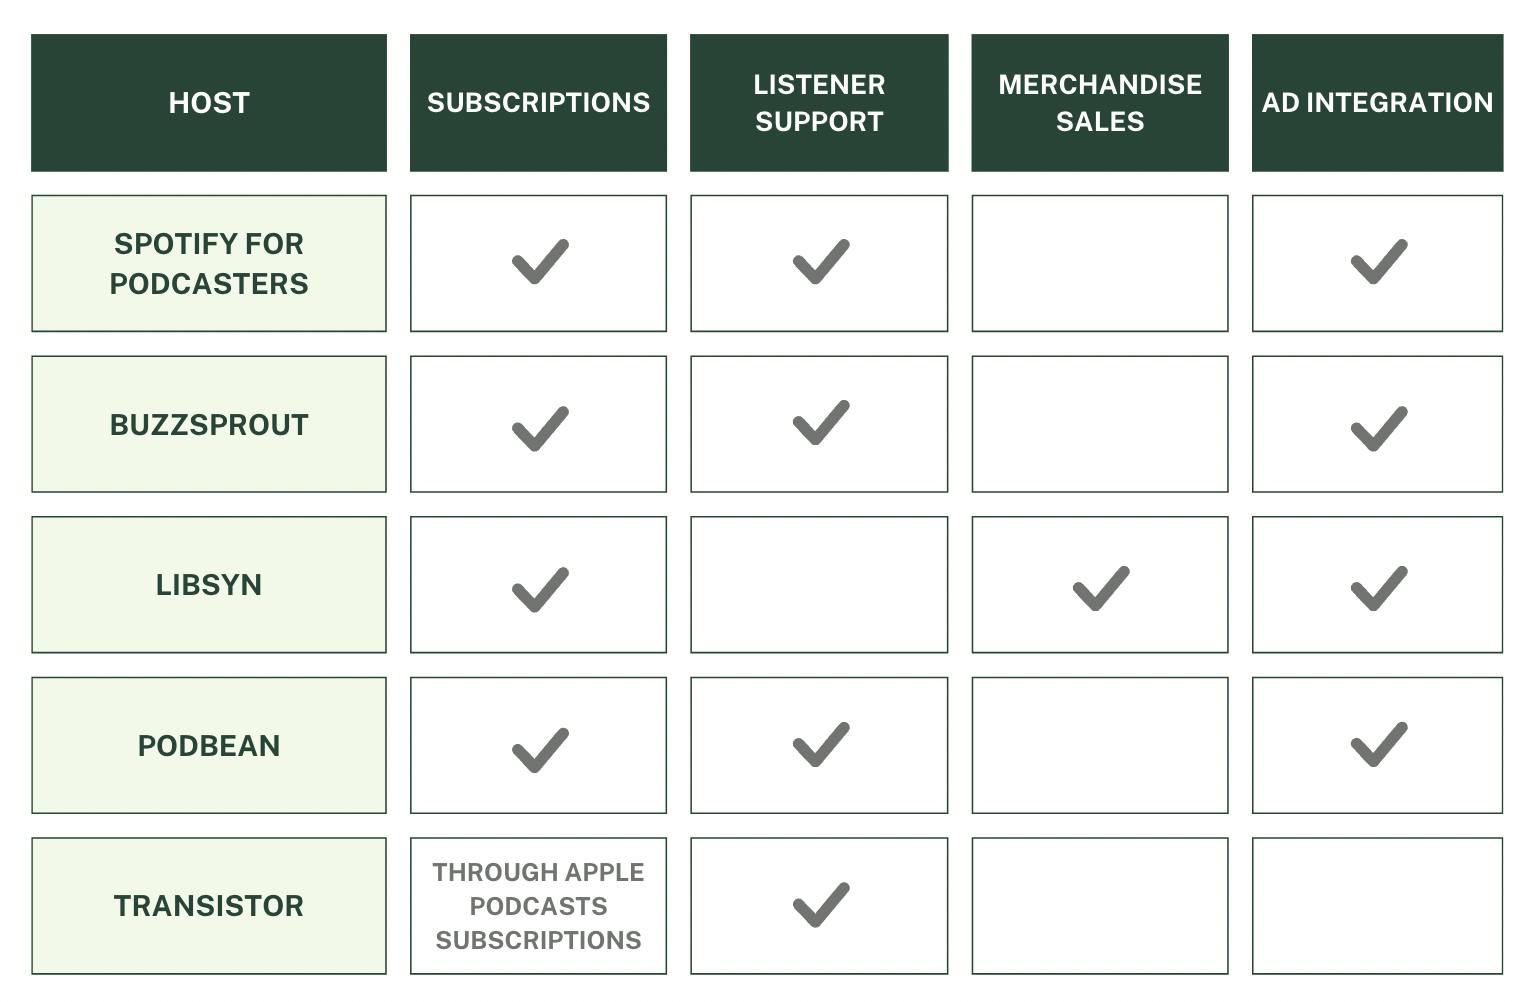 chart comparing monetization features